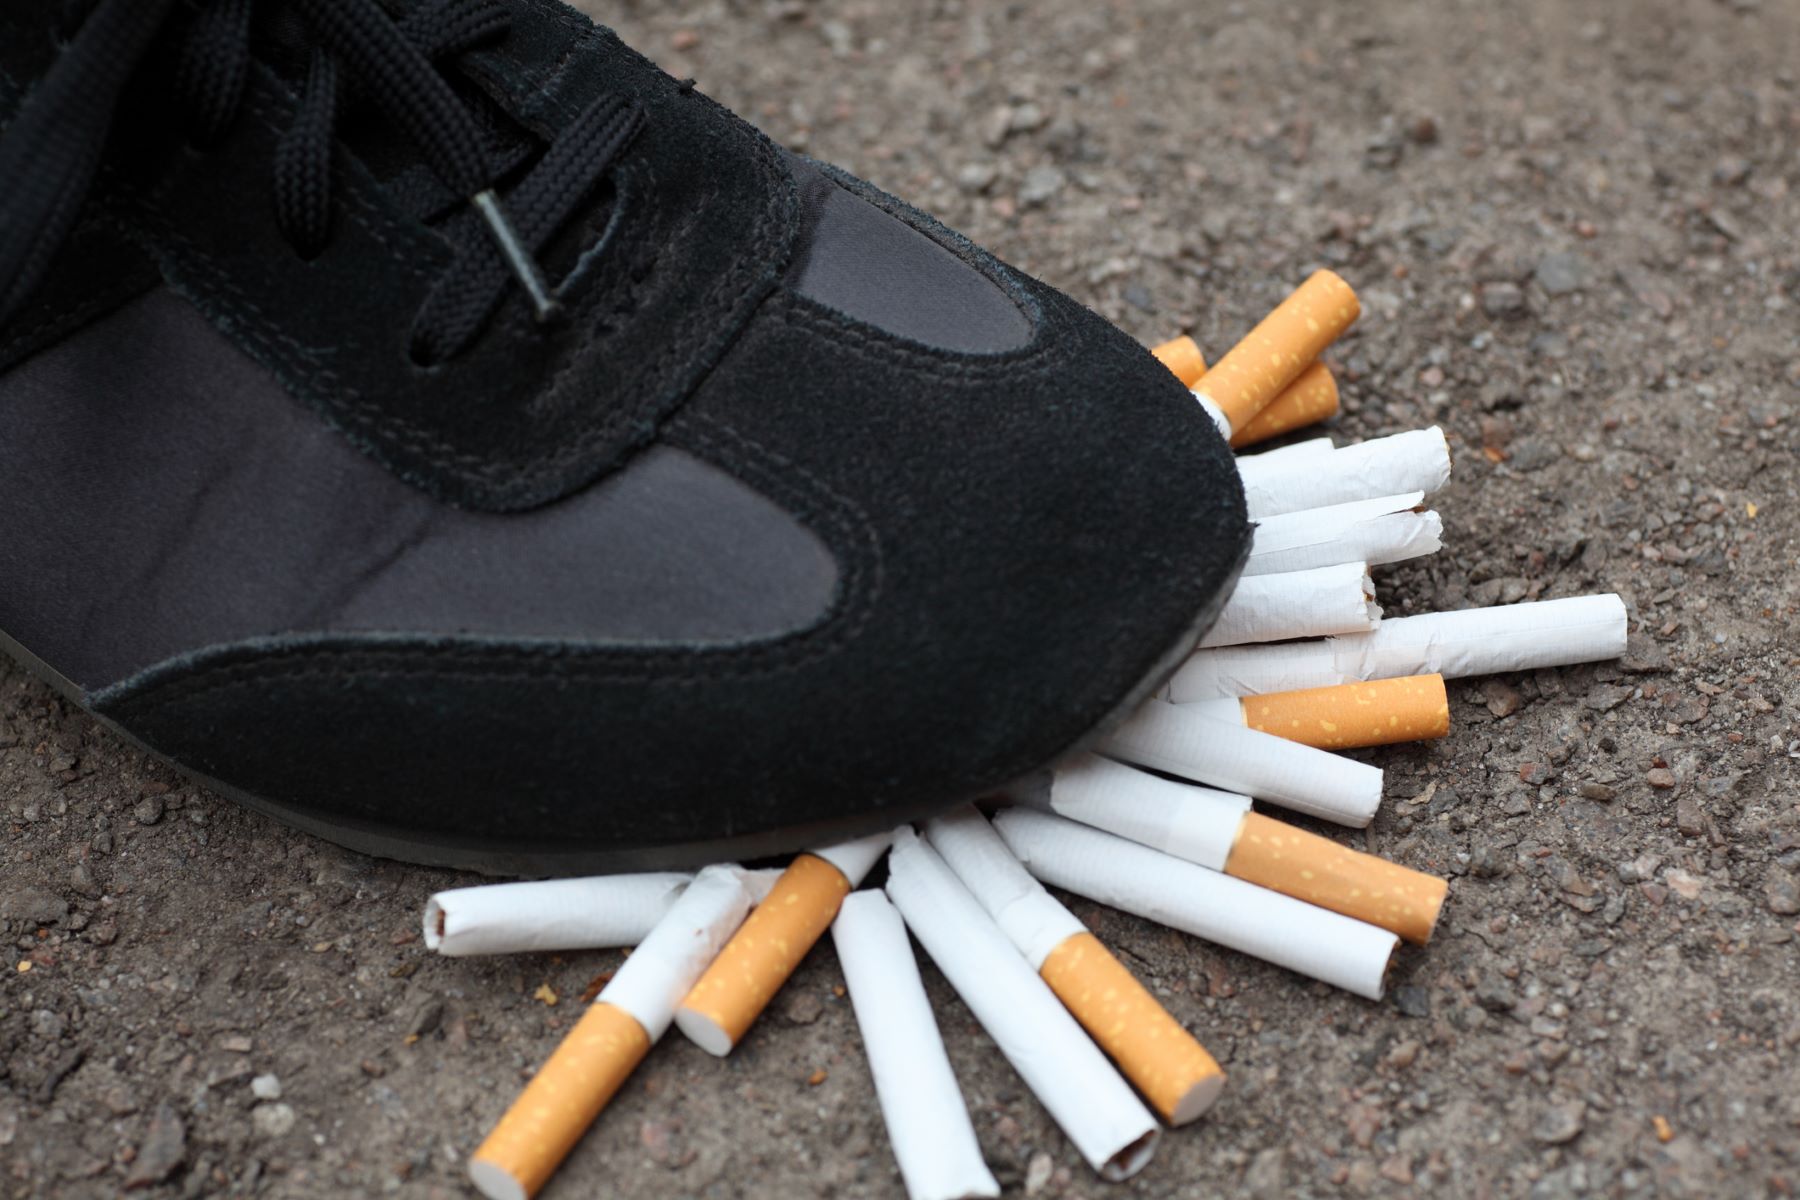 Stomping cigarettes to reduce or quit smoking